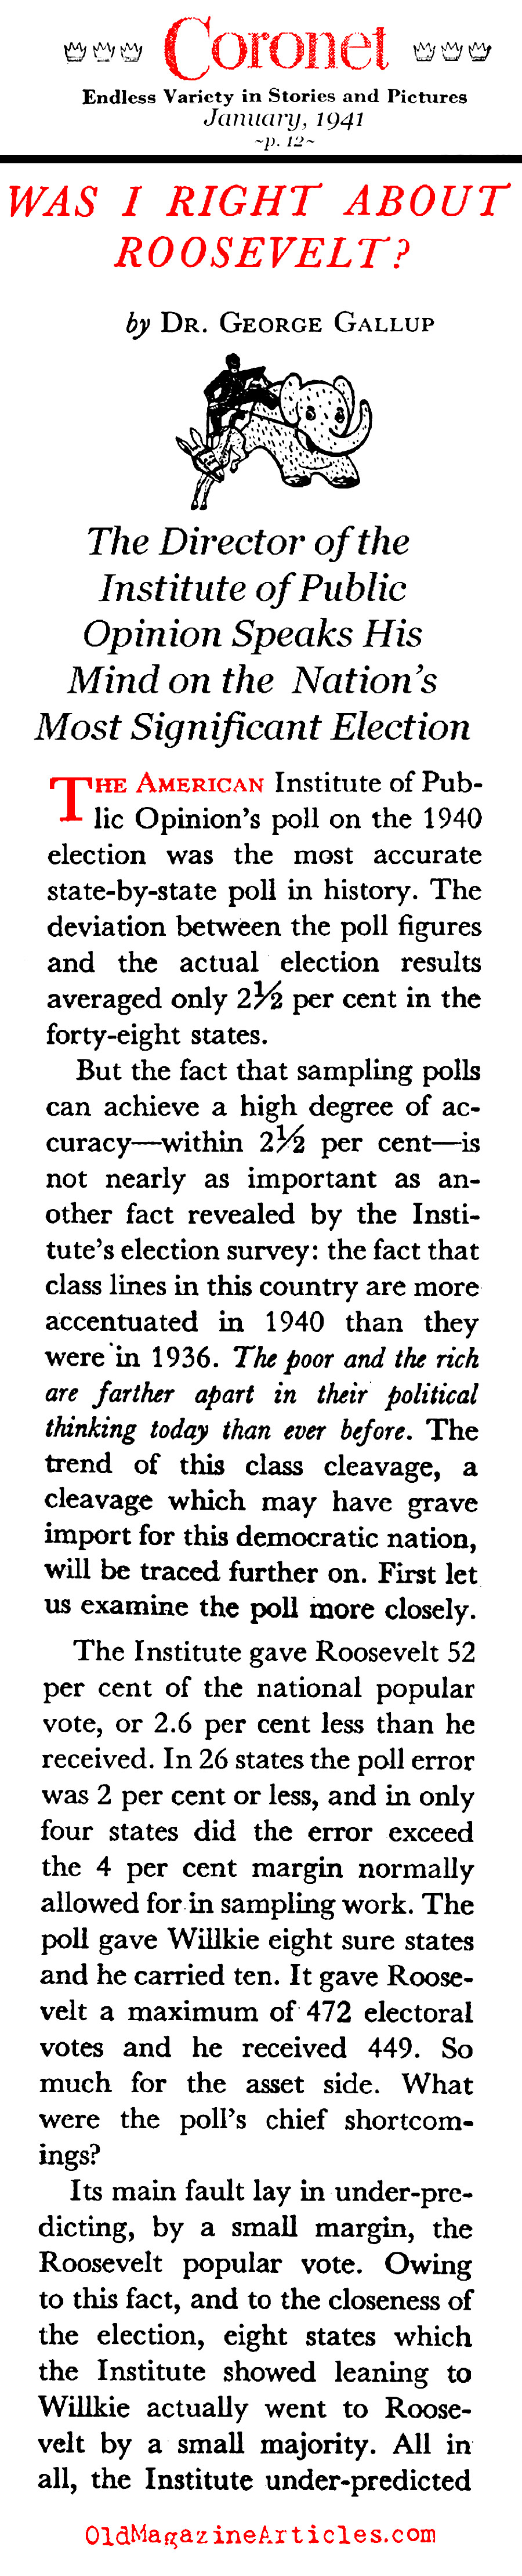 The 1940 Election Polls and FDR (Coronet Magazine, 1941)